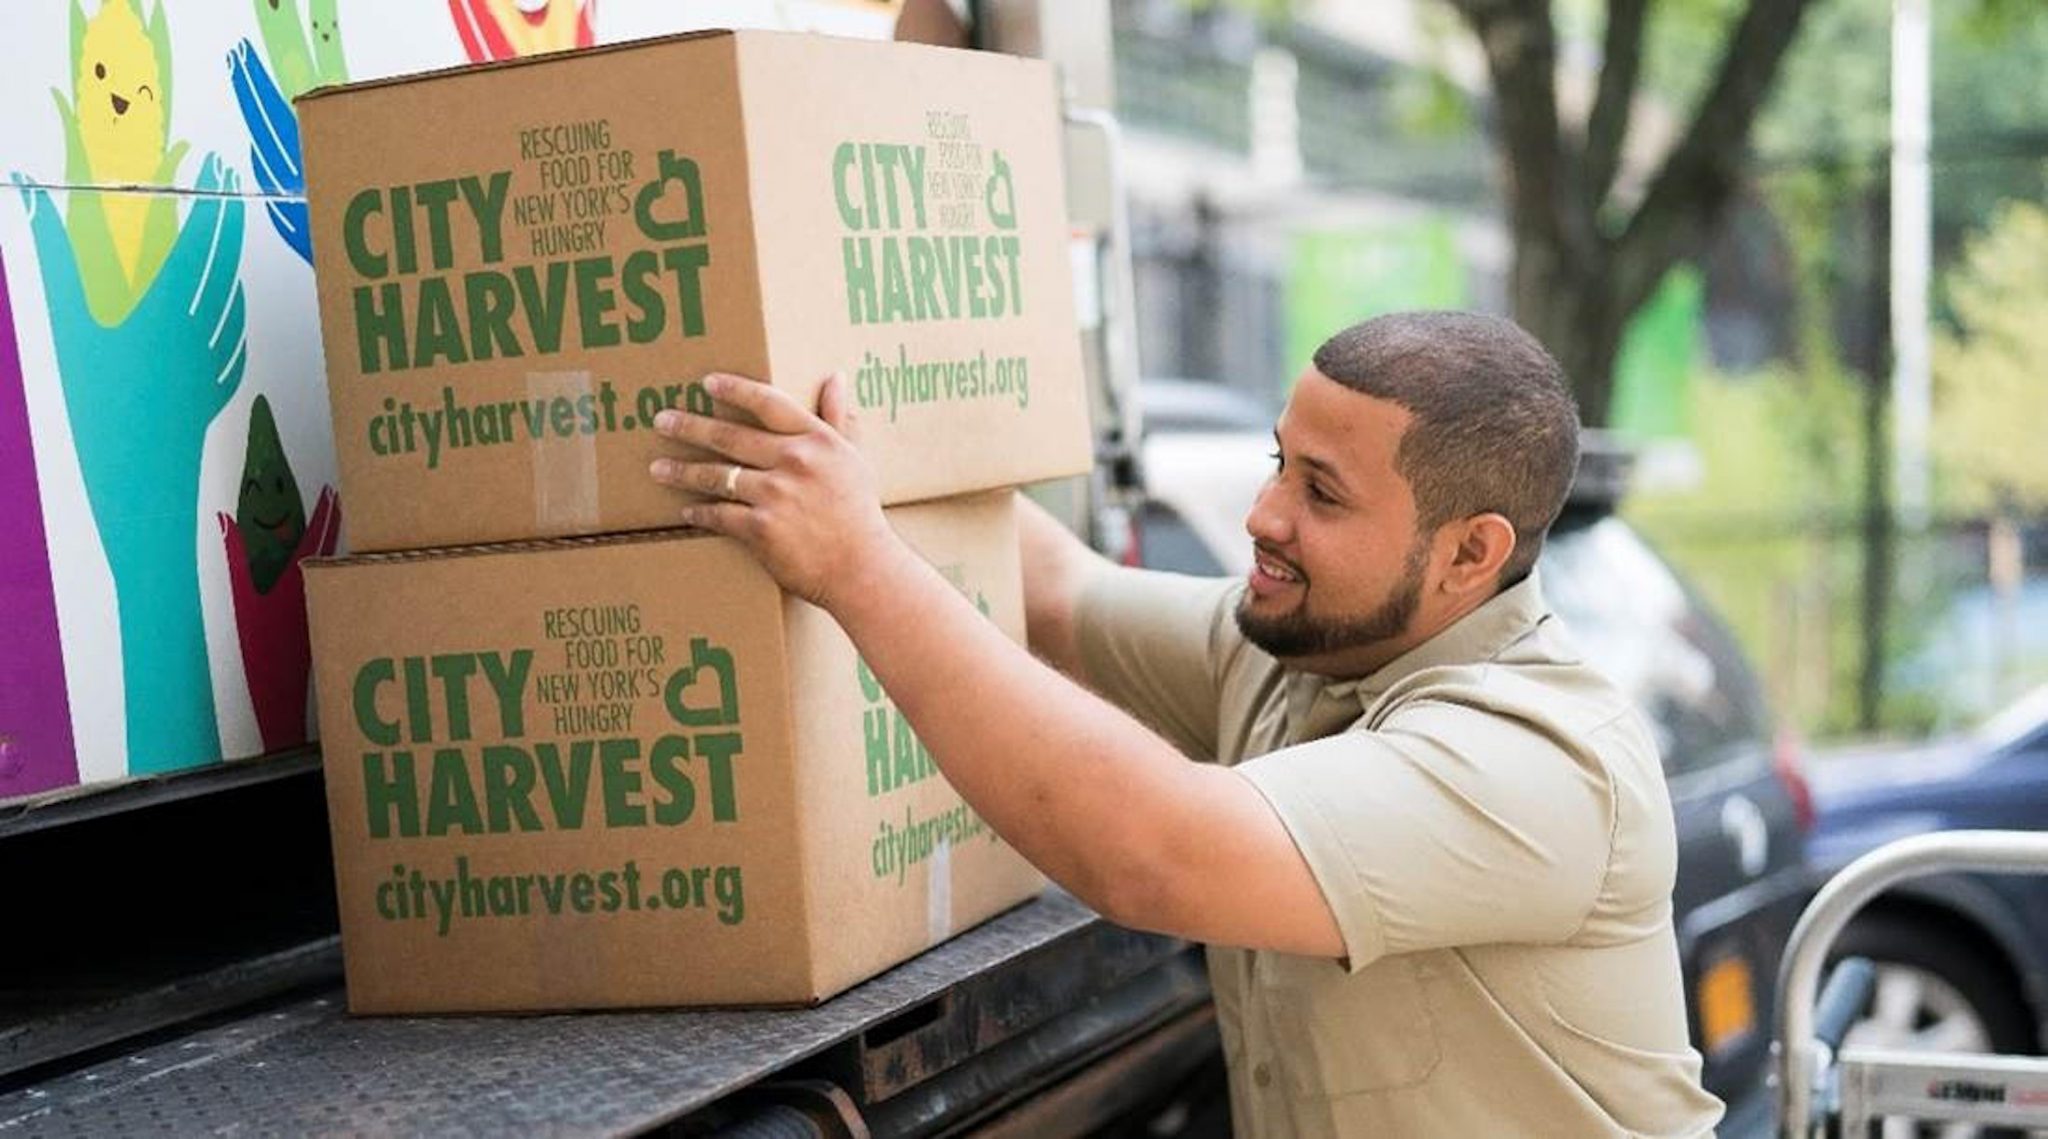 City Harvest delivered 56 million pounds of food to New Yorkers in need